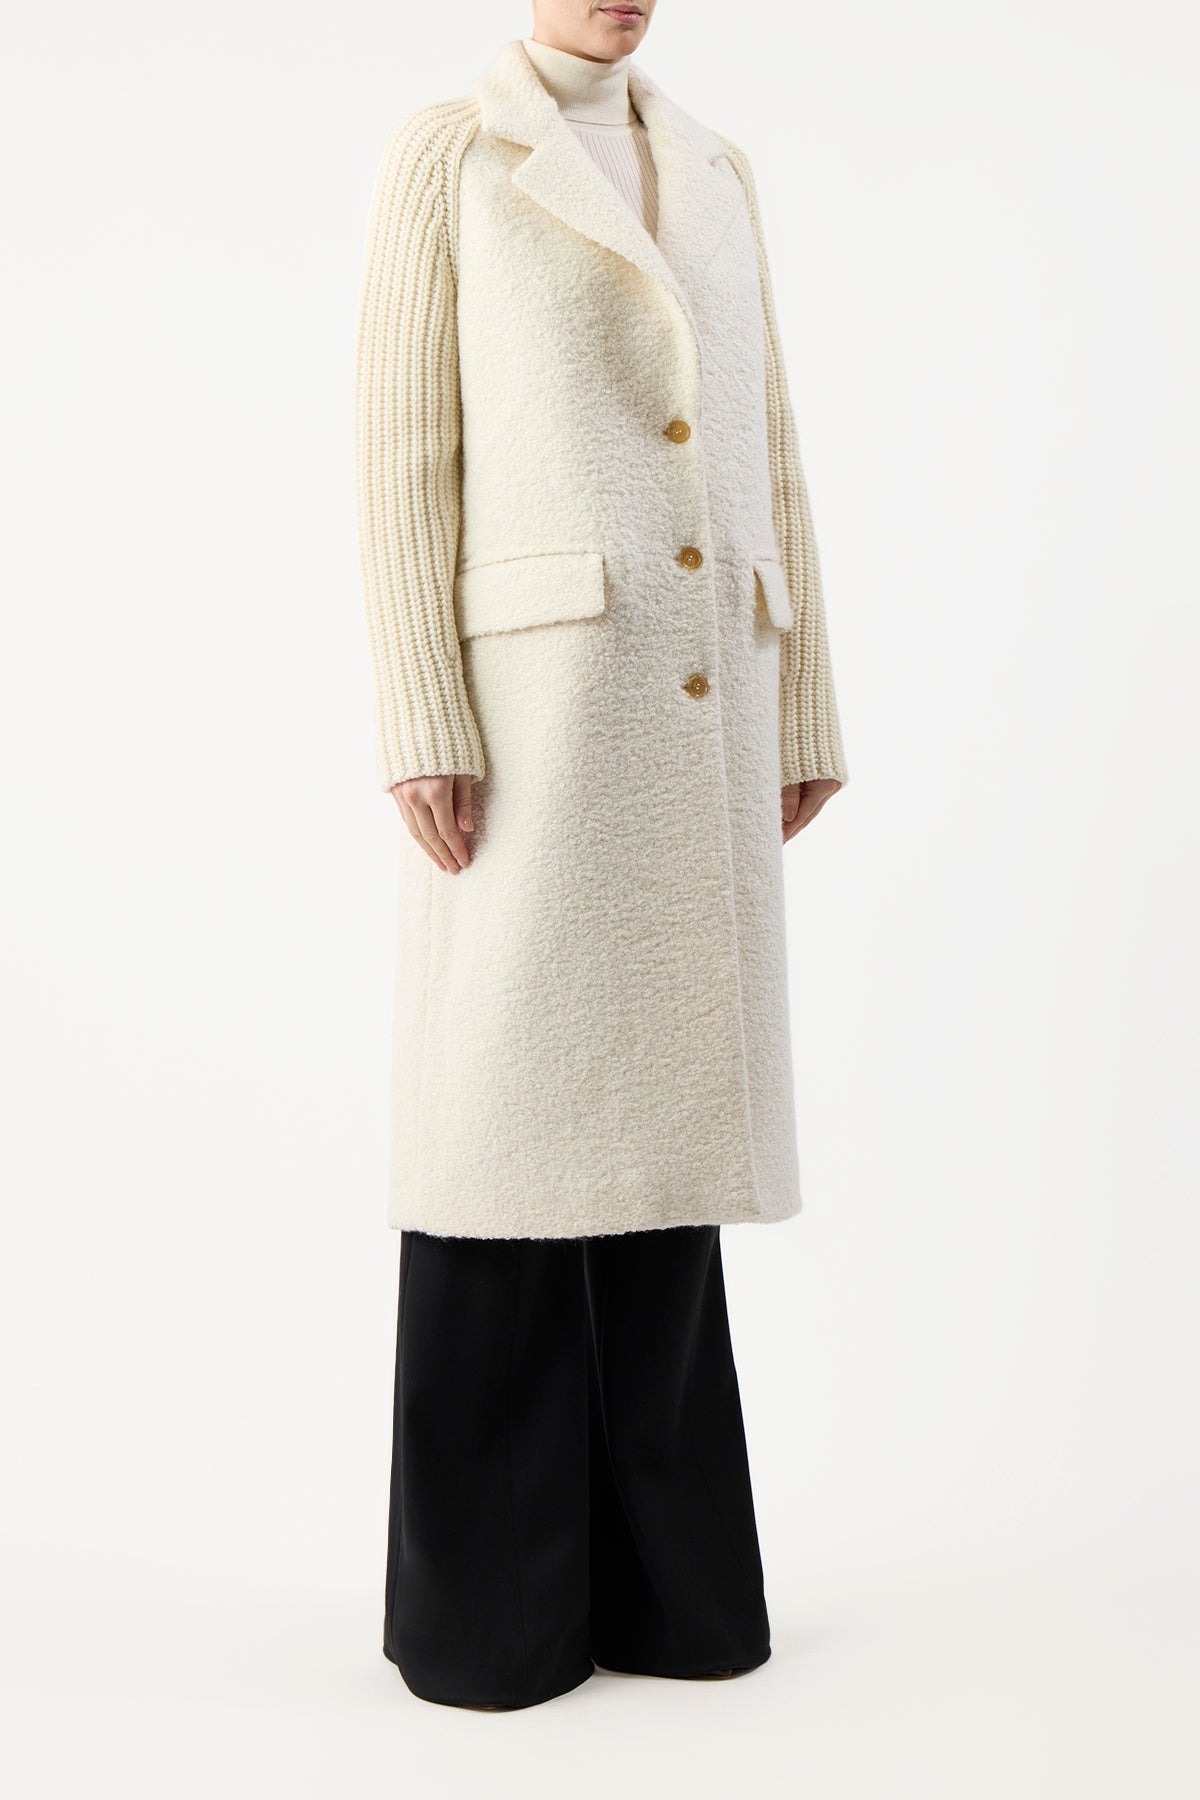 Charles Coat in Ivory Cashmere Boucle